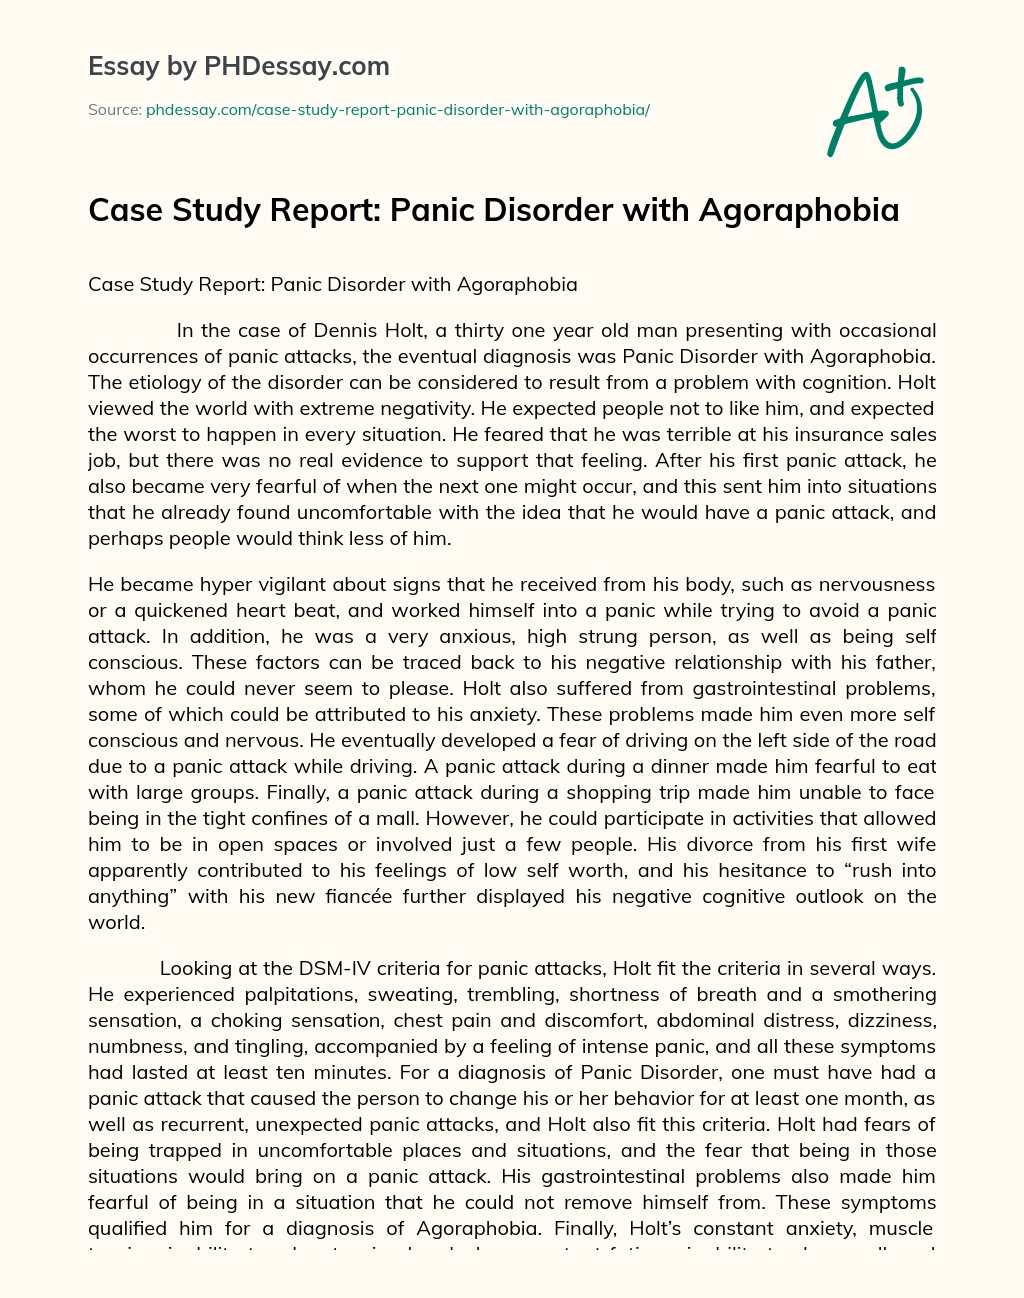 Case Study Report: Panic Disorder with Agoraphobia essay